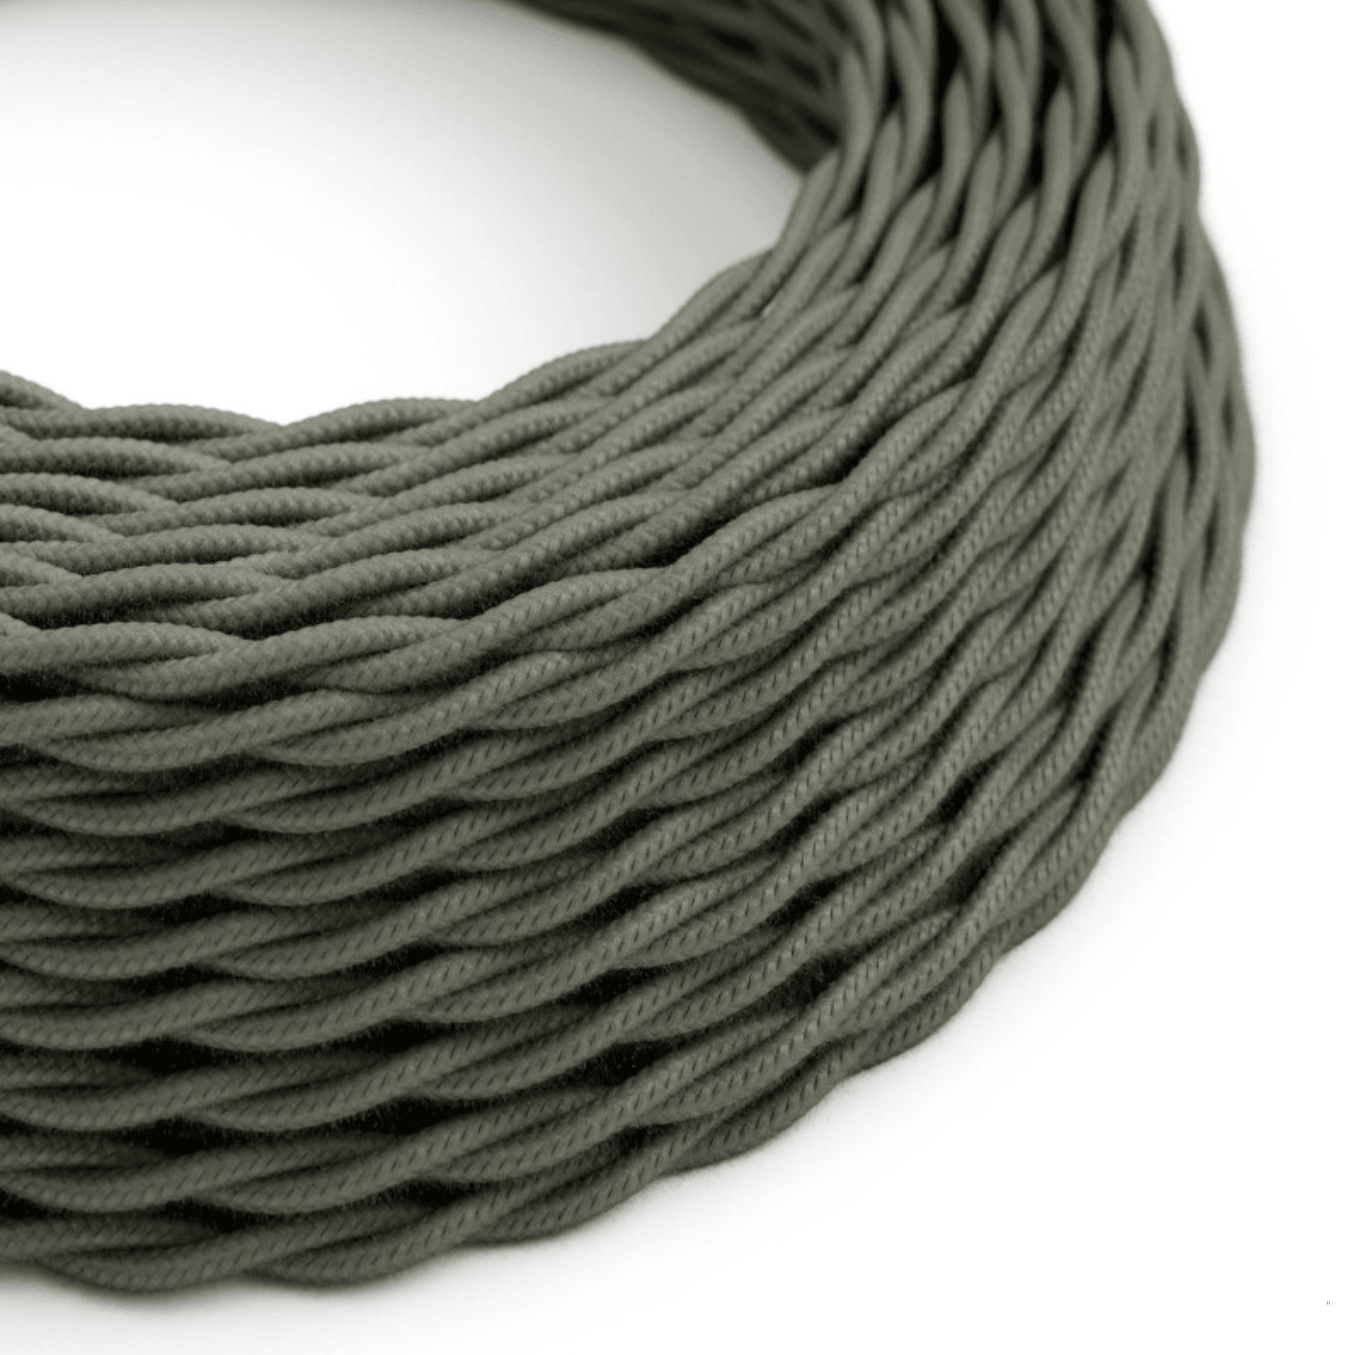 Twisted Electric Cable covered by Cotton solid colour fabric TC63 Sage Green - MooBoo Home